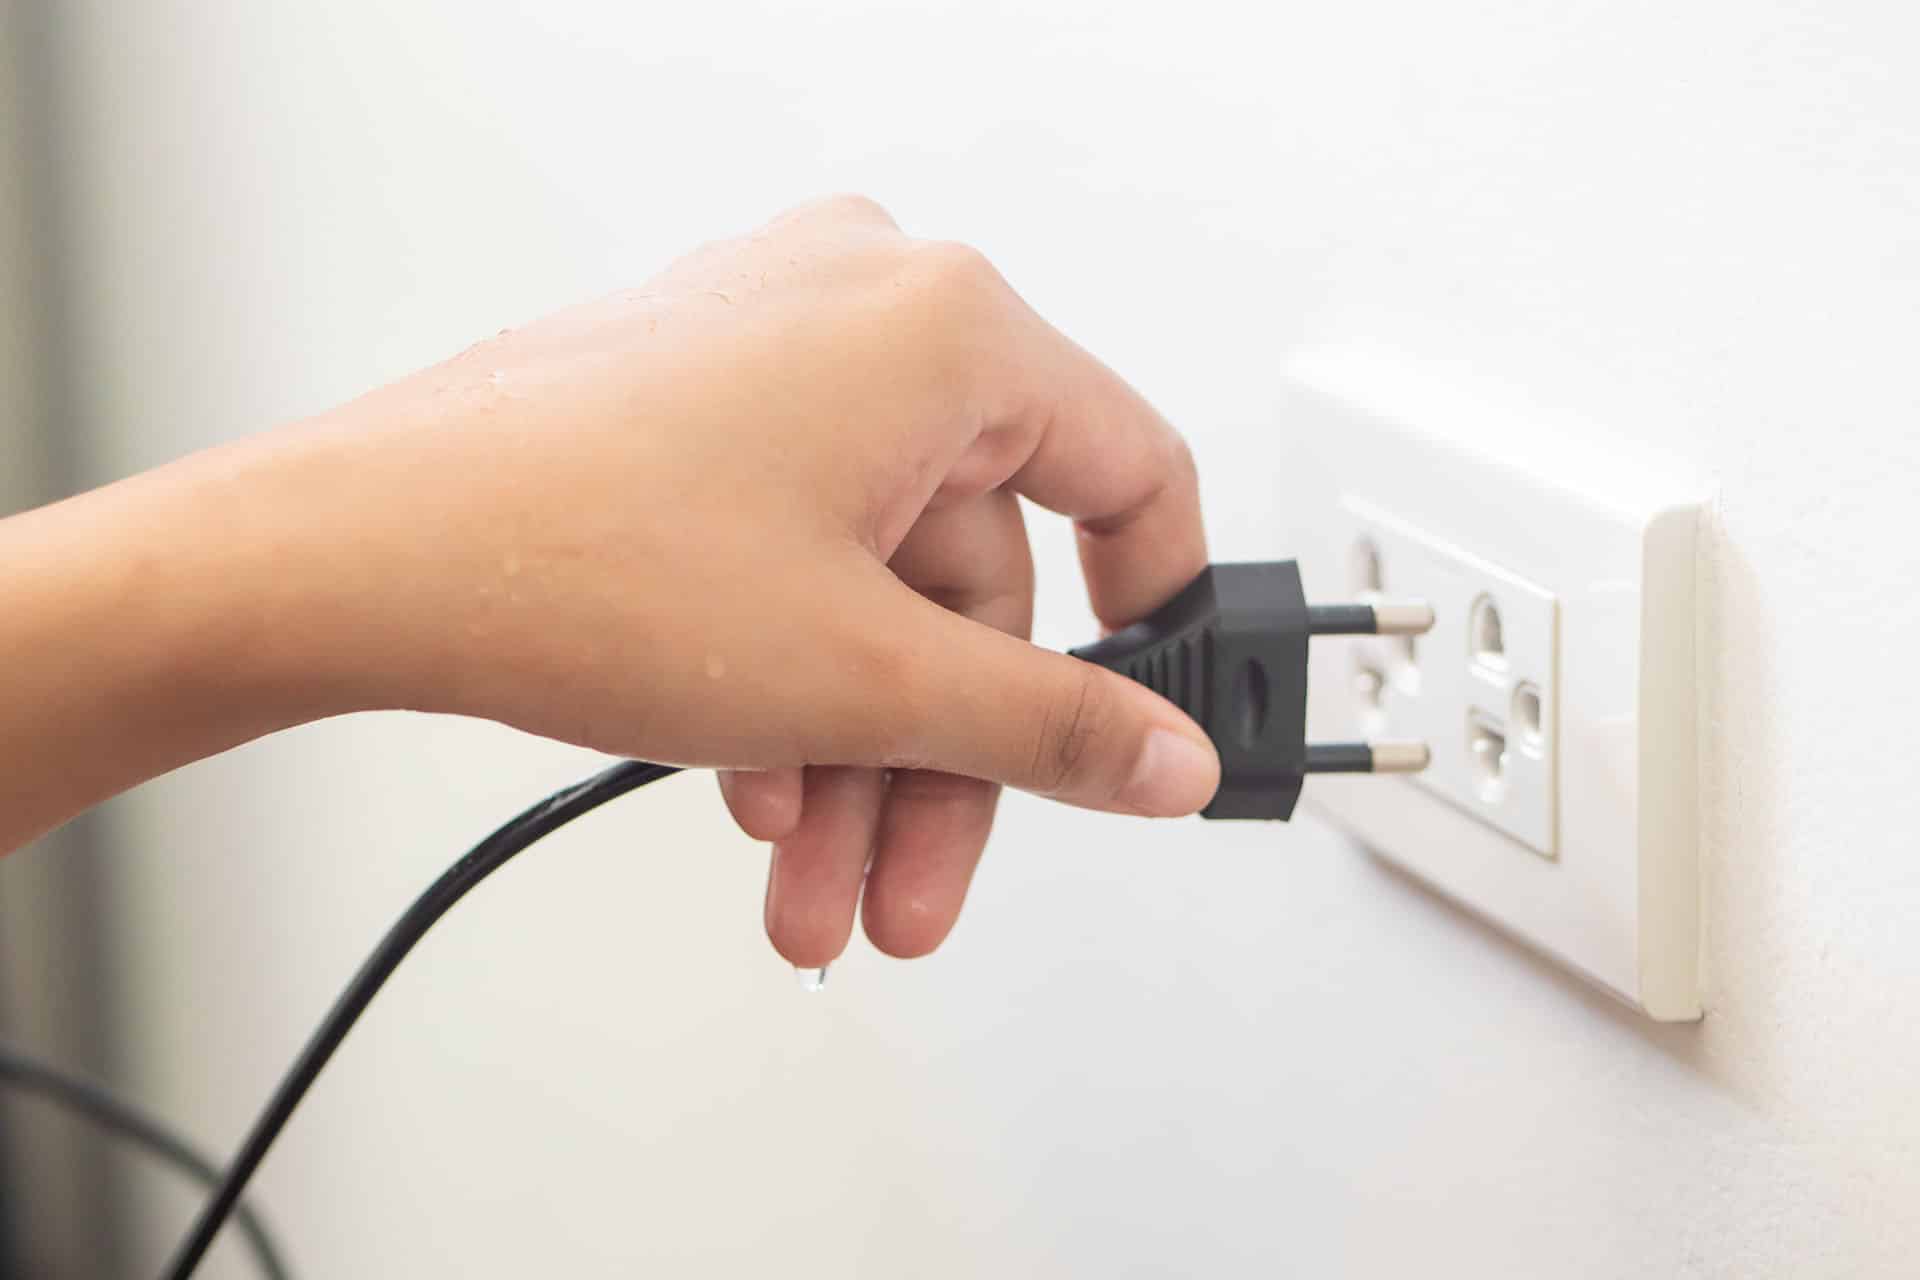 Using electricity wall outlet with wet hand